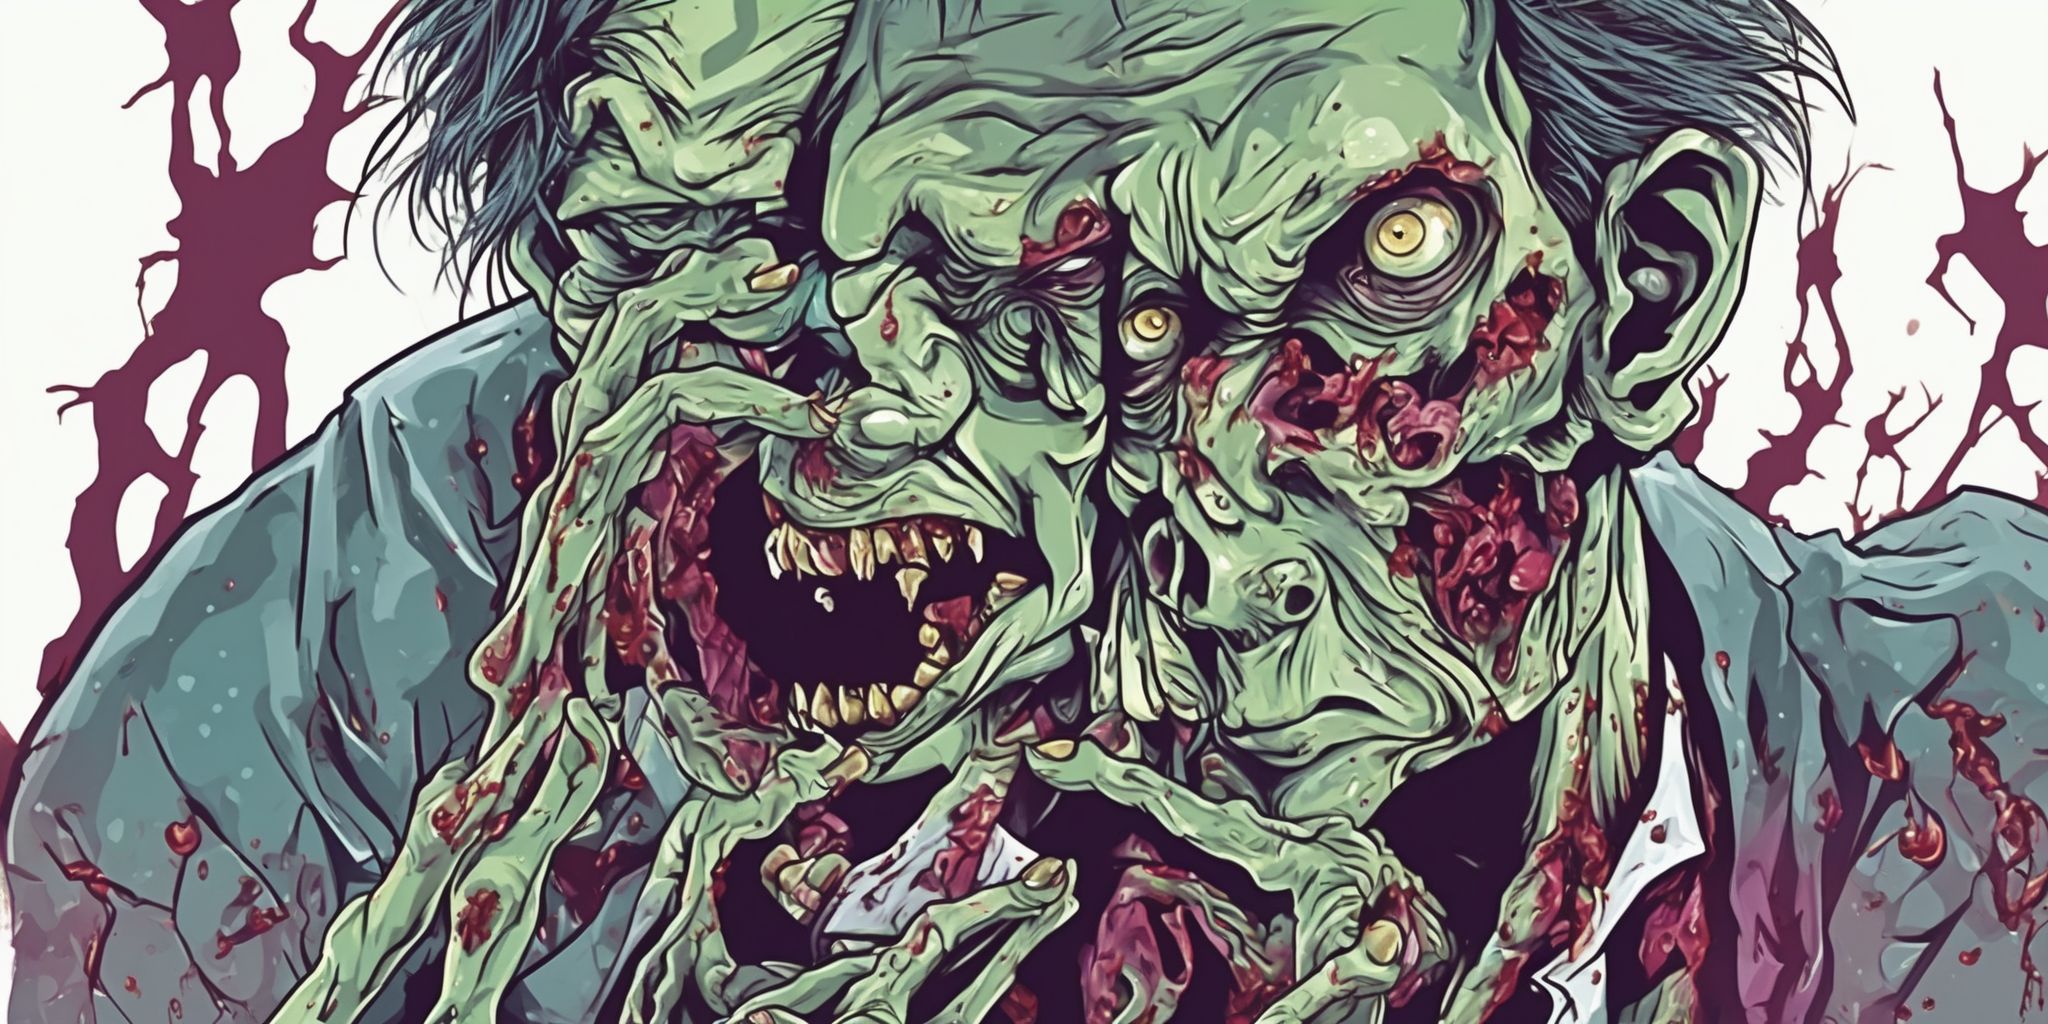 Zombie in illustration style with gradients and white background